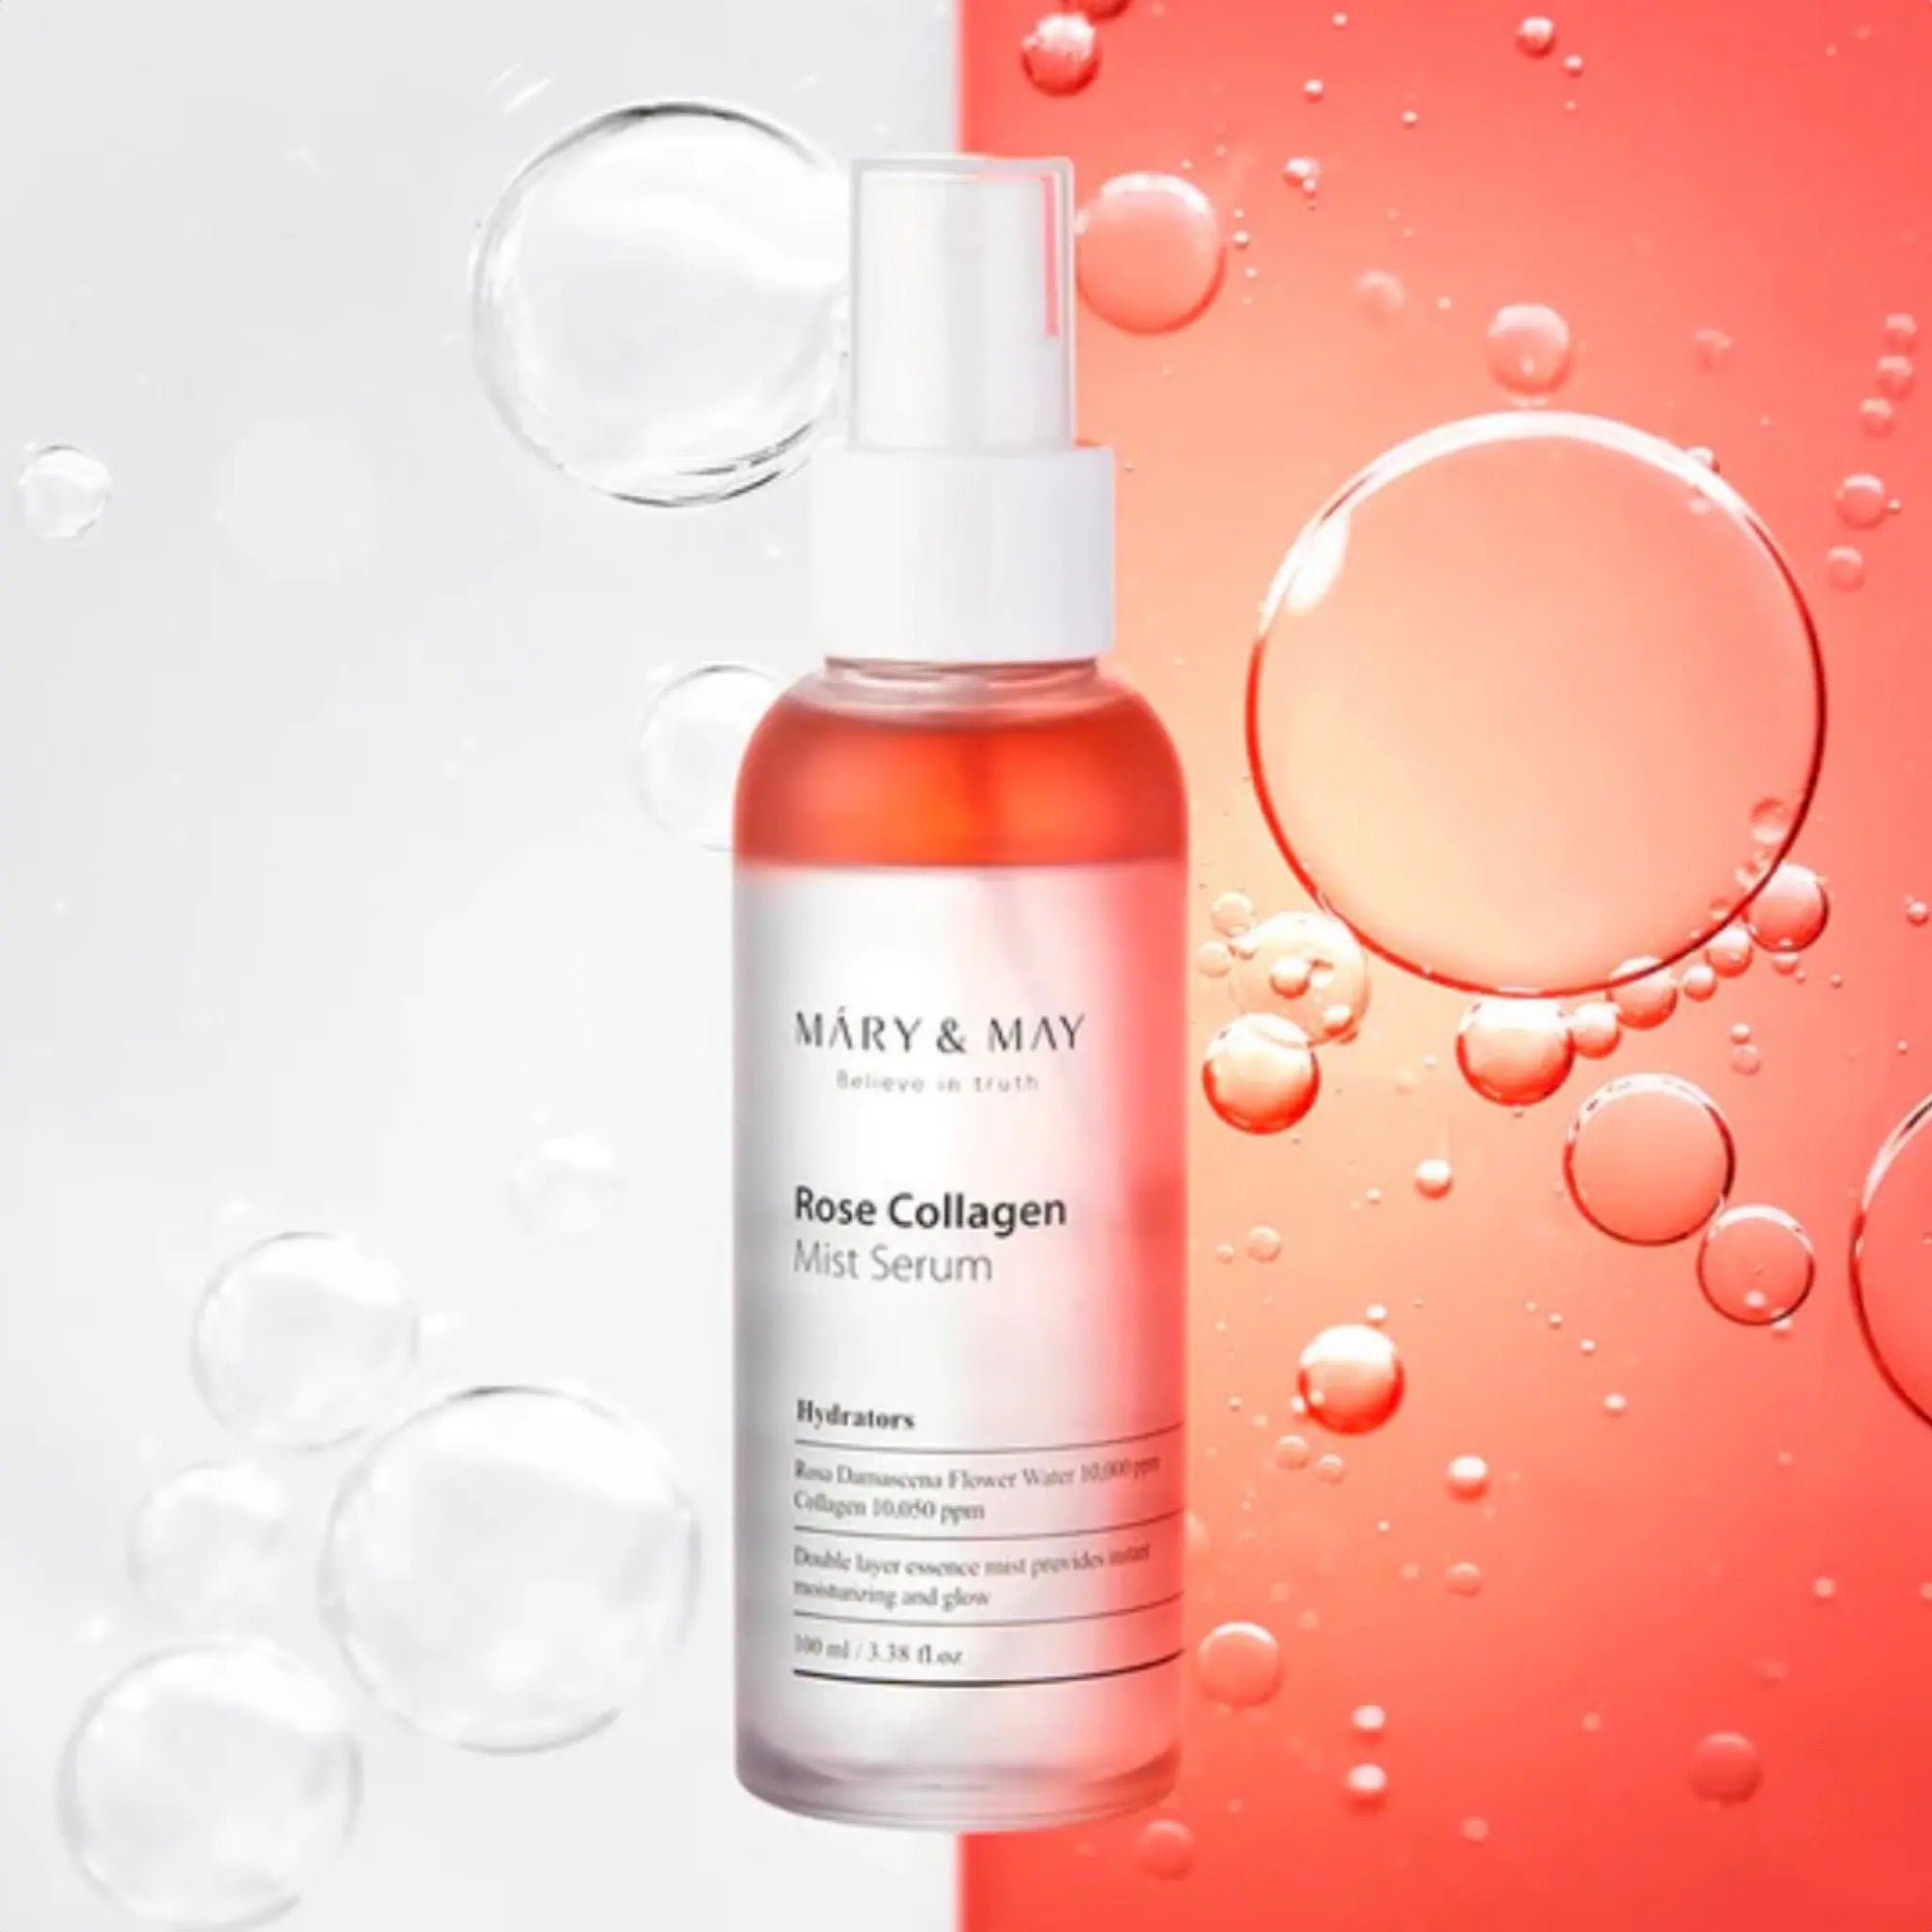 Mary & May - Rose Collagen Mist Serum 100mL Mary & May